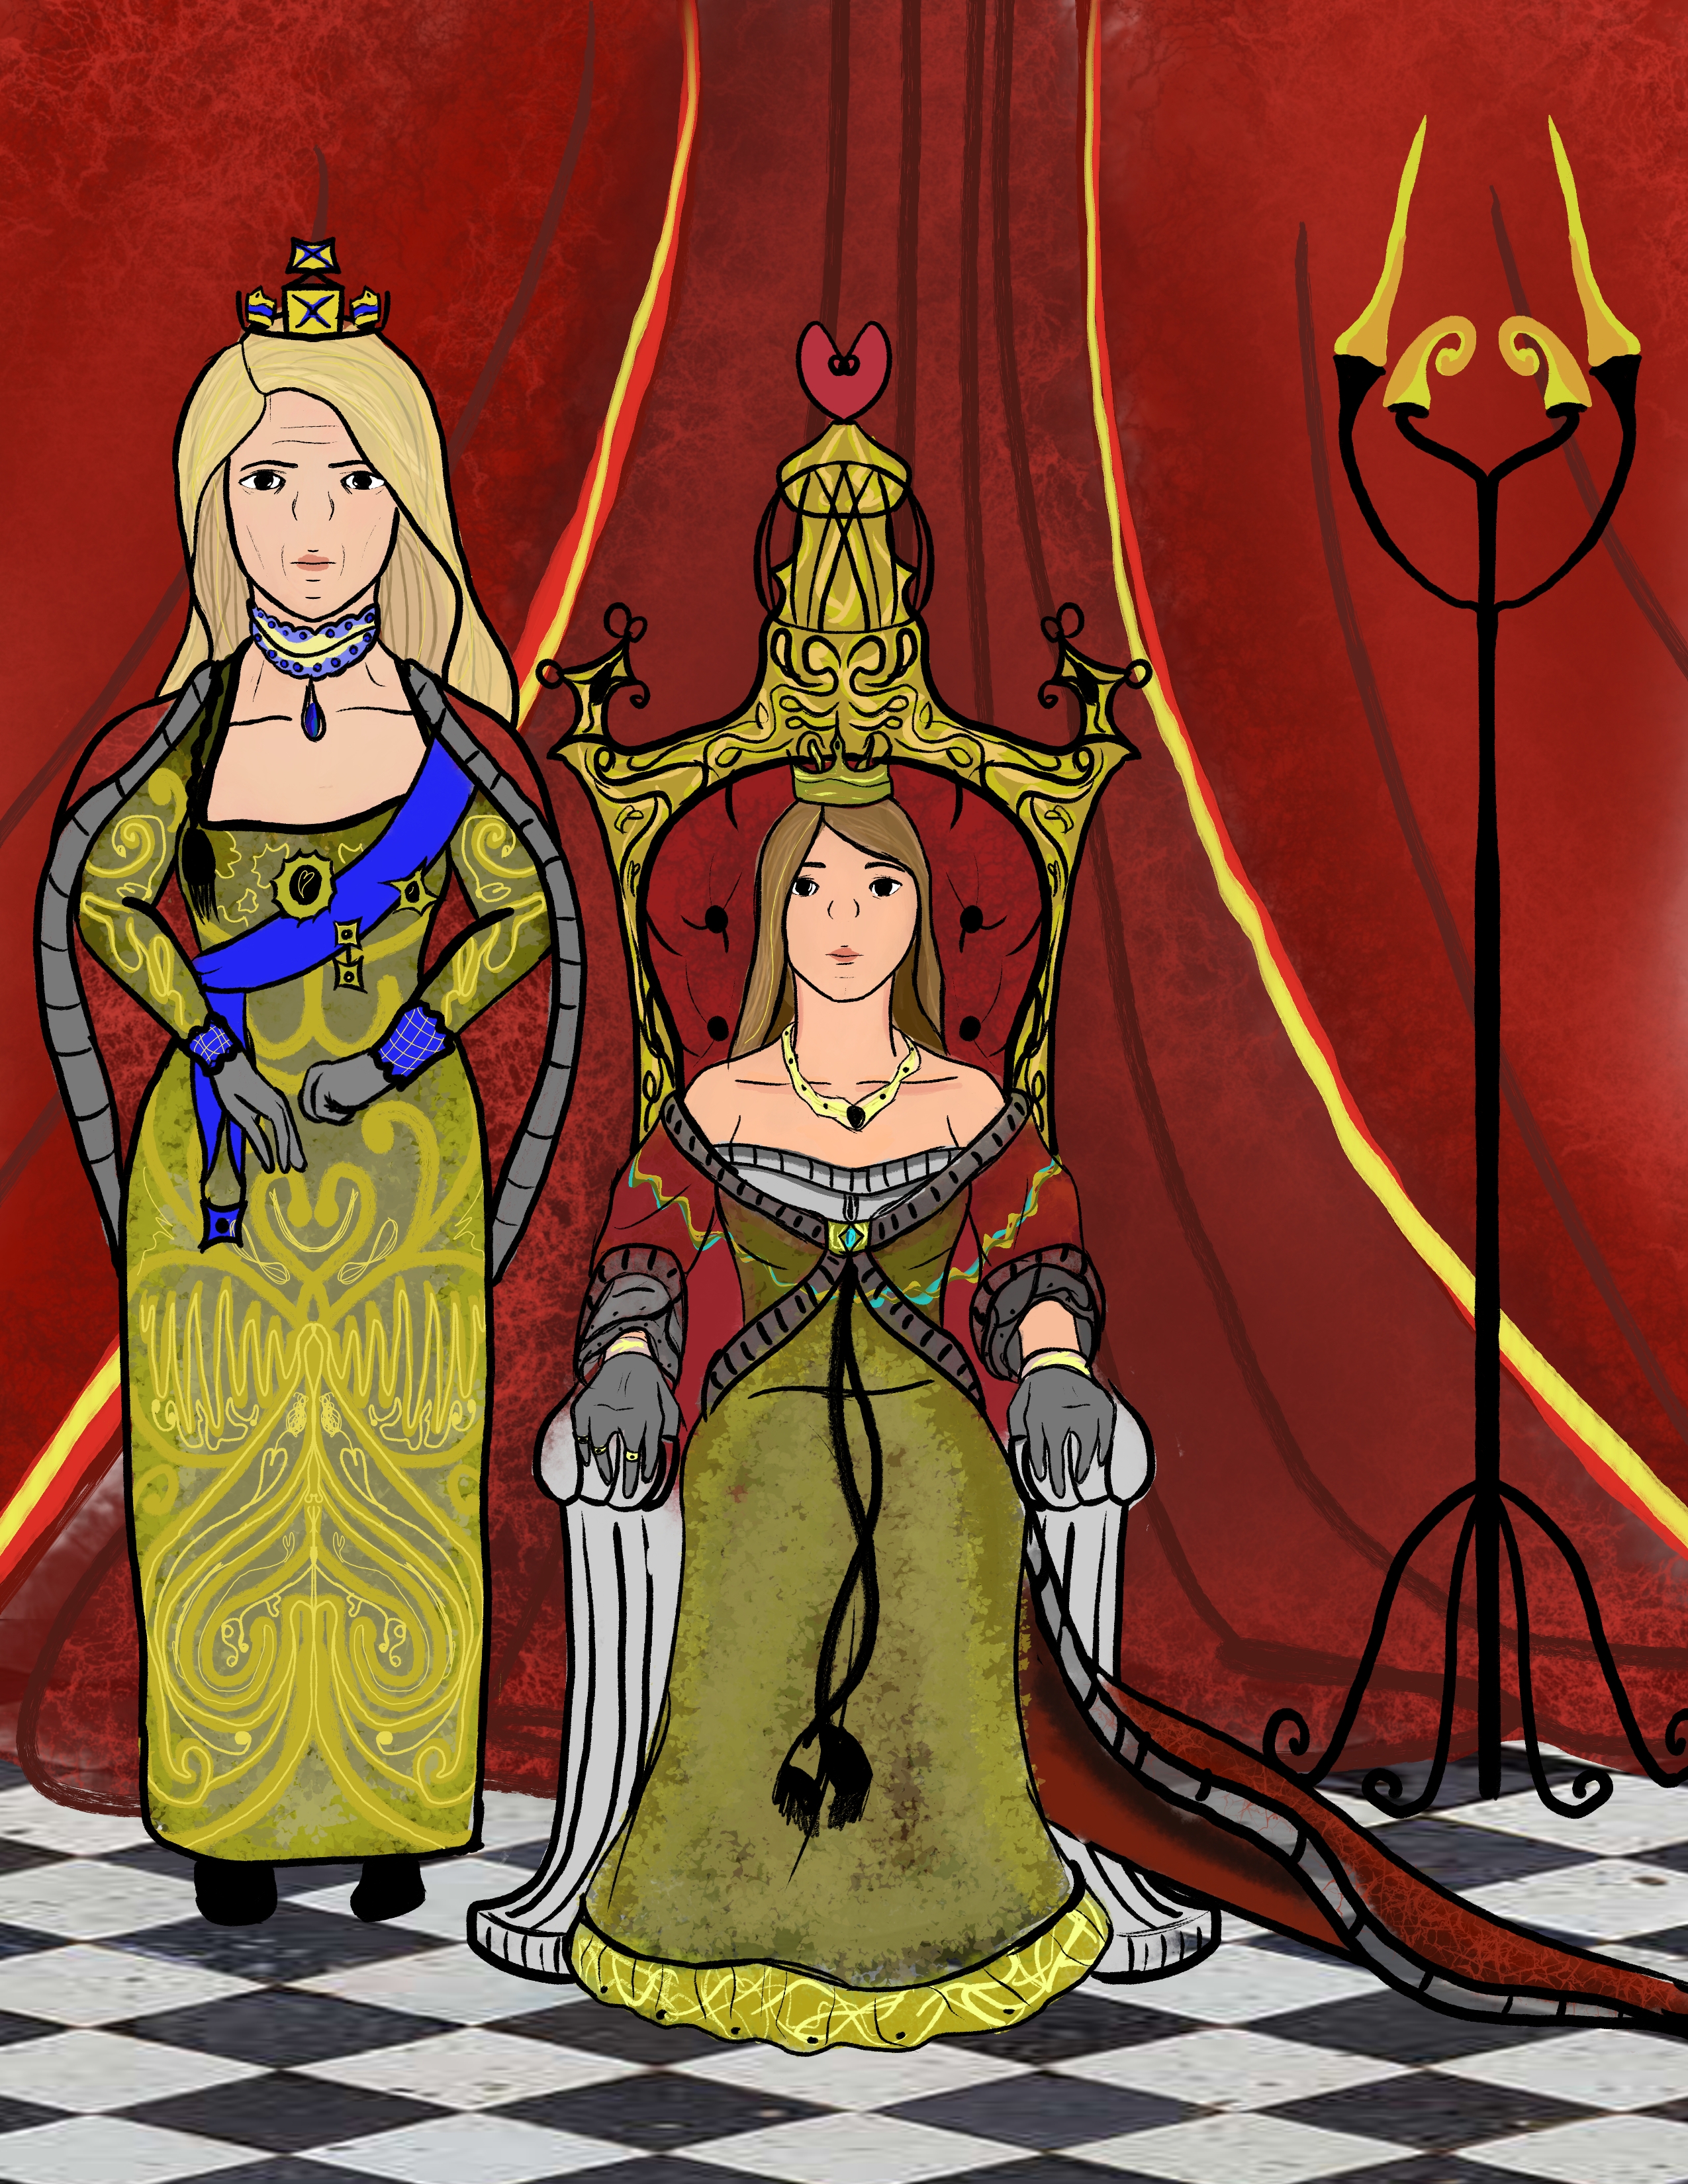 Digital drawing of Ky as a queen with Mama Ky by her side